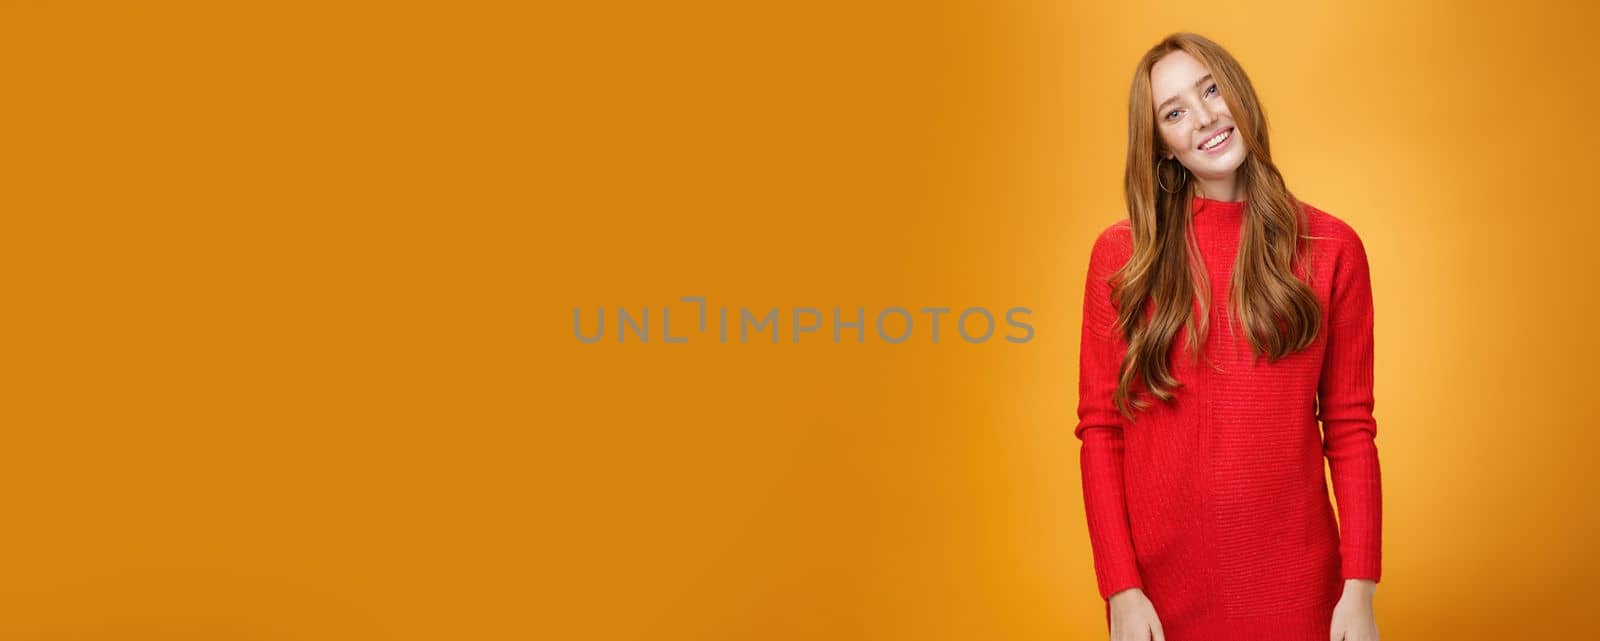 Lifestyle. Attrative and stylish elegant busiensswoman with ginger hair in red knitted dress tilting head and smiling flirty and happily posing over orange background as listening with interest to conversation.